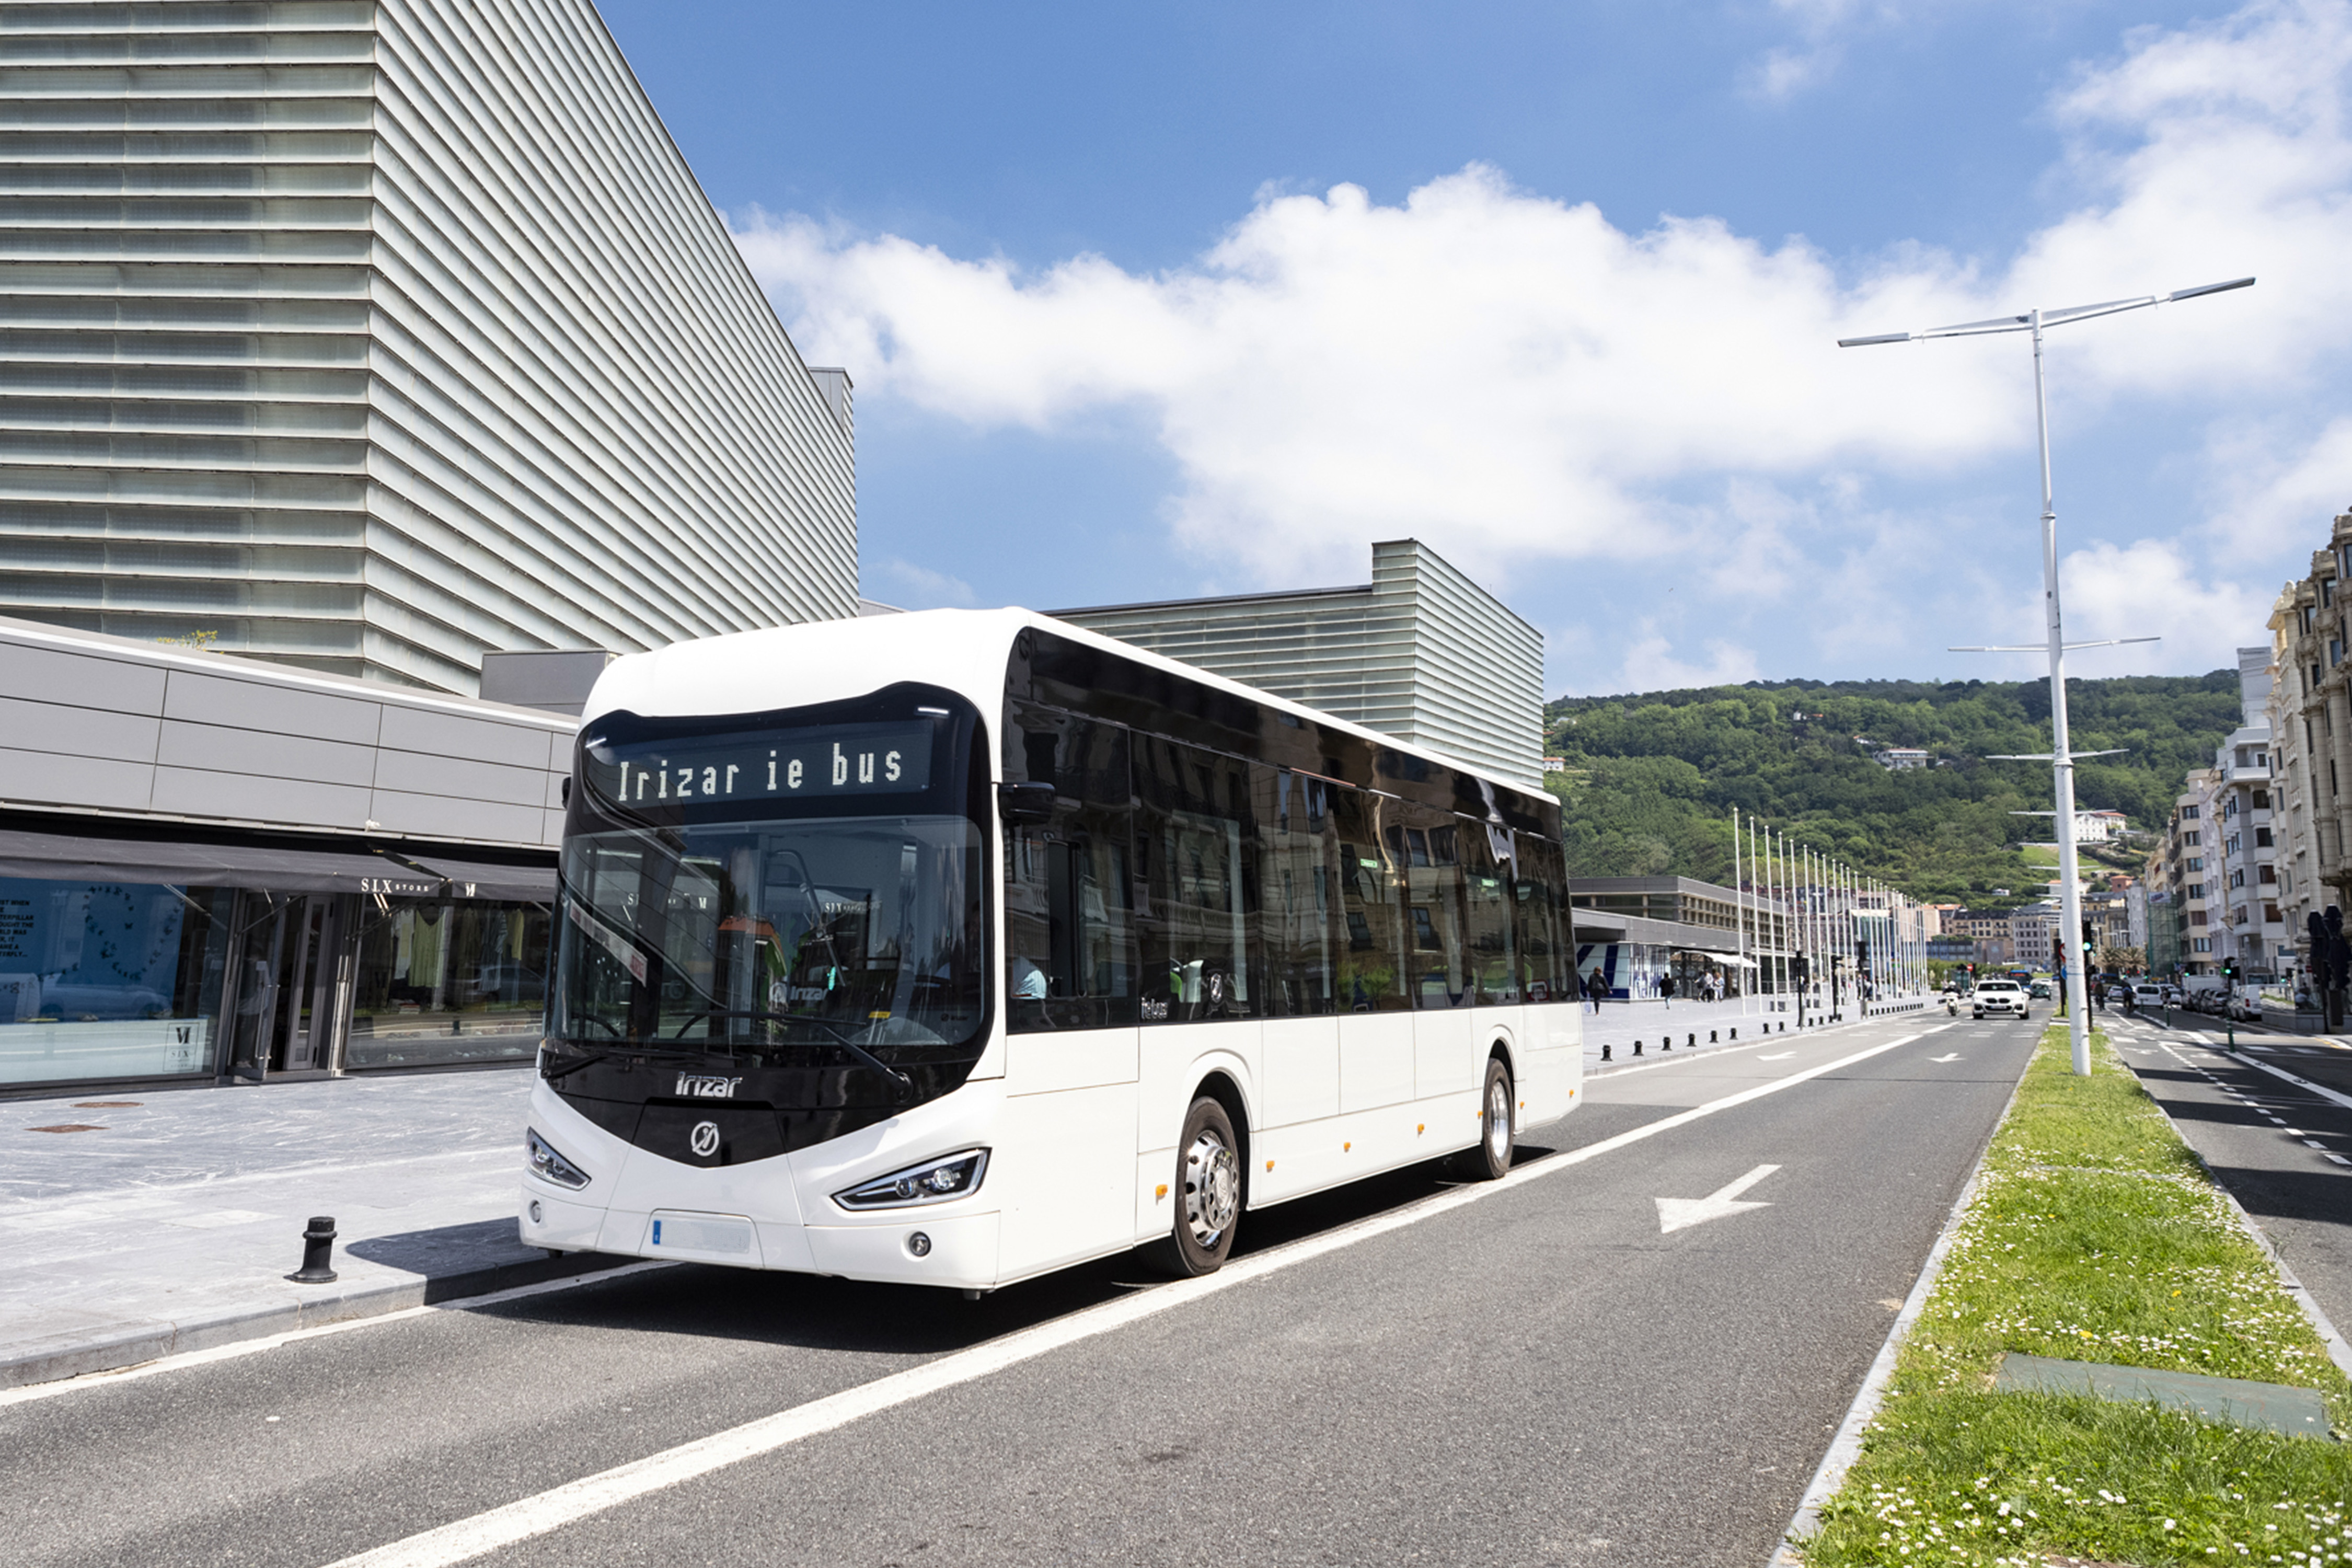 Irizar ie bus wins the Bus of the Year 2021 award 